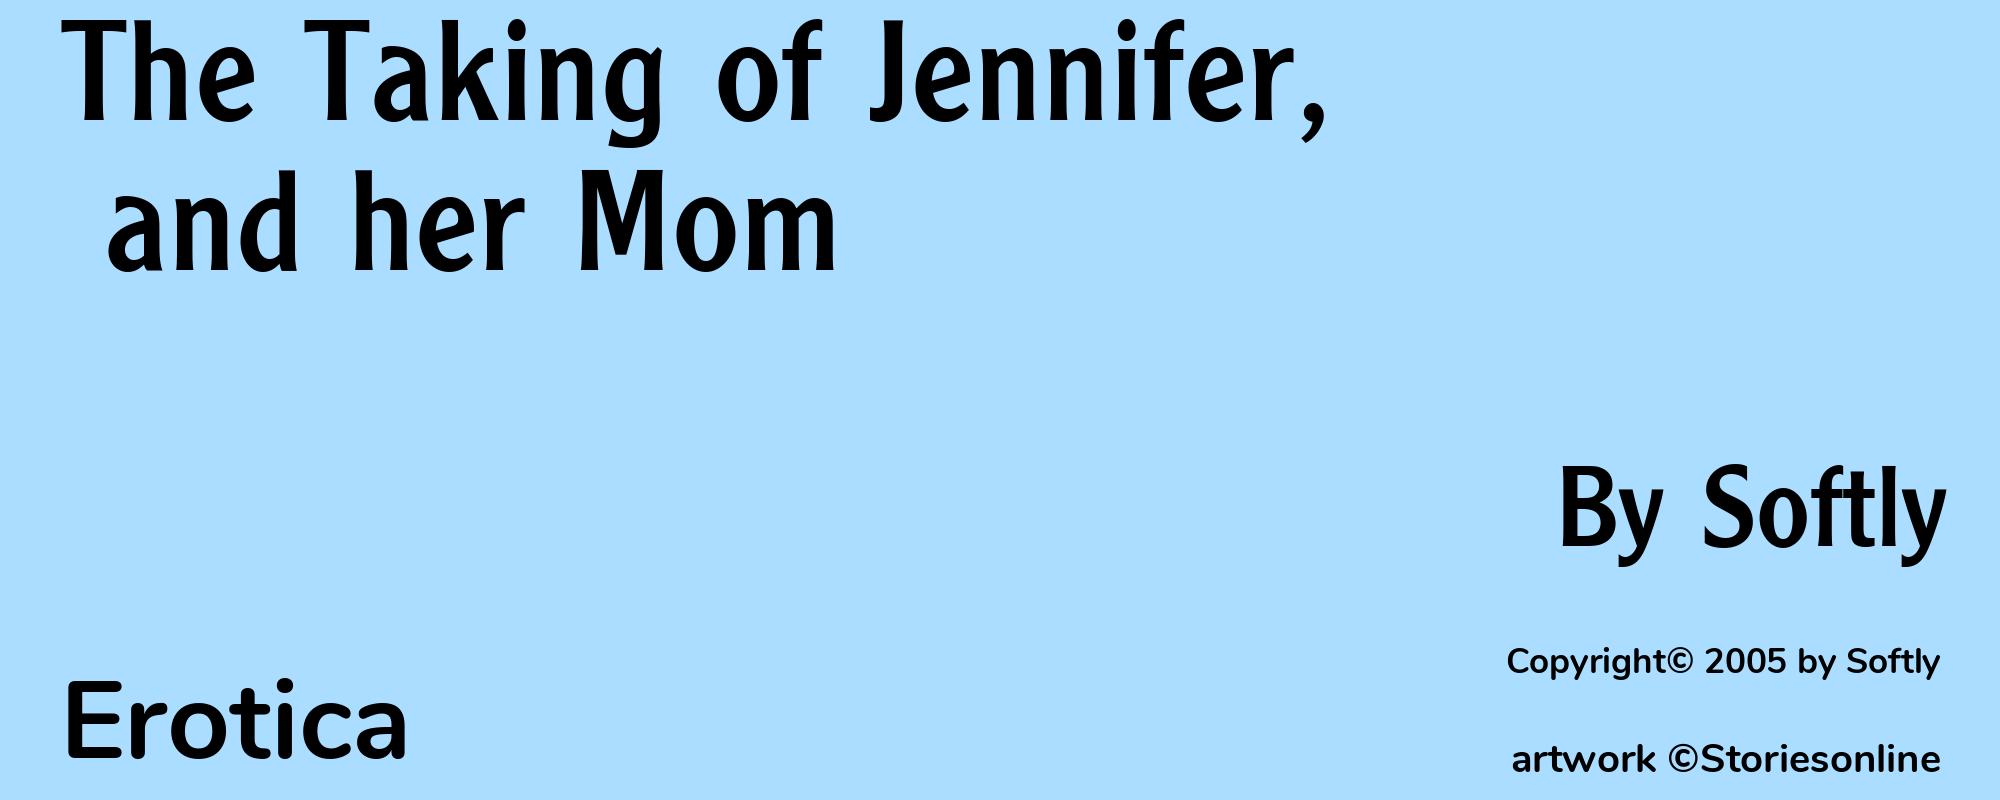 The Taking of Jennifer, and her Mom - Cover